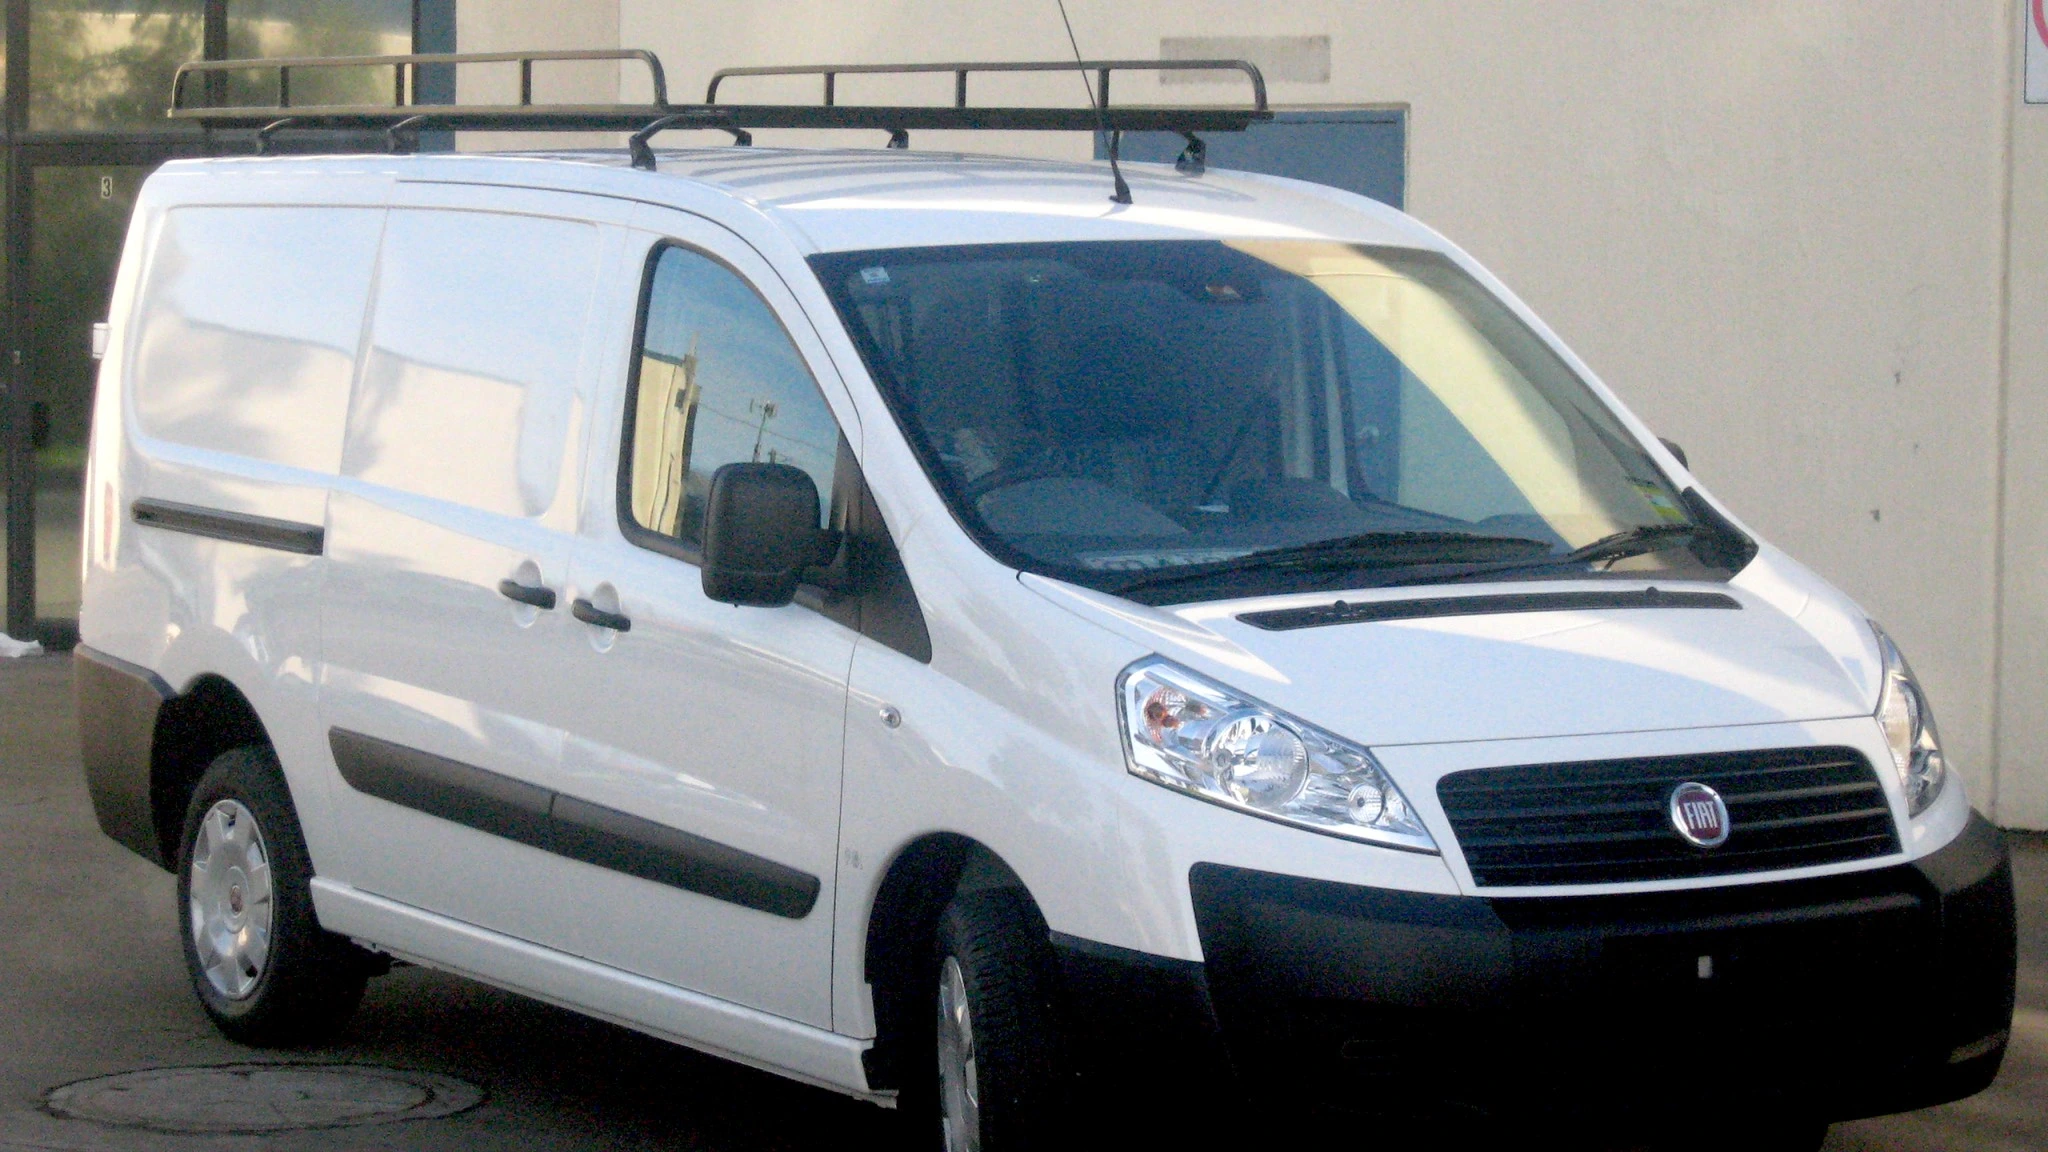 Fiat-Scudo-with-a-Commercial-Max-roof-rack-fitted